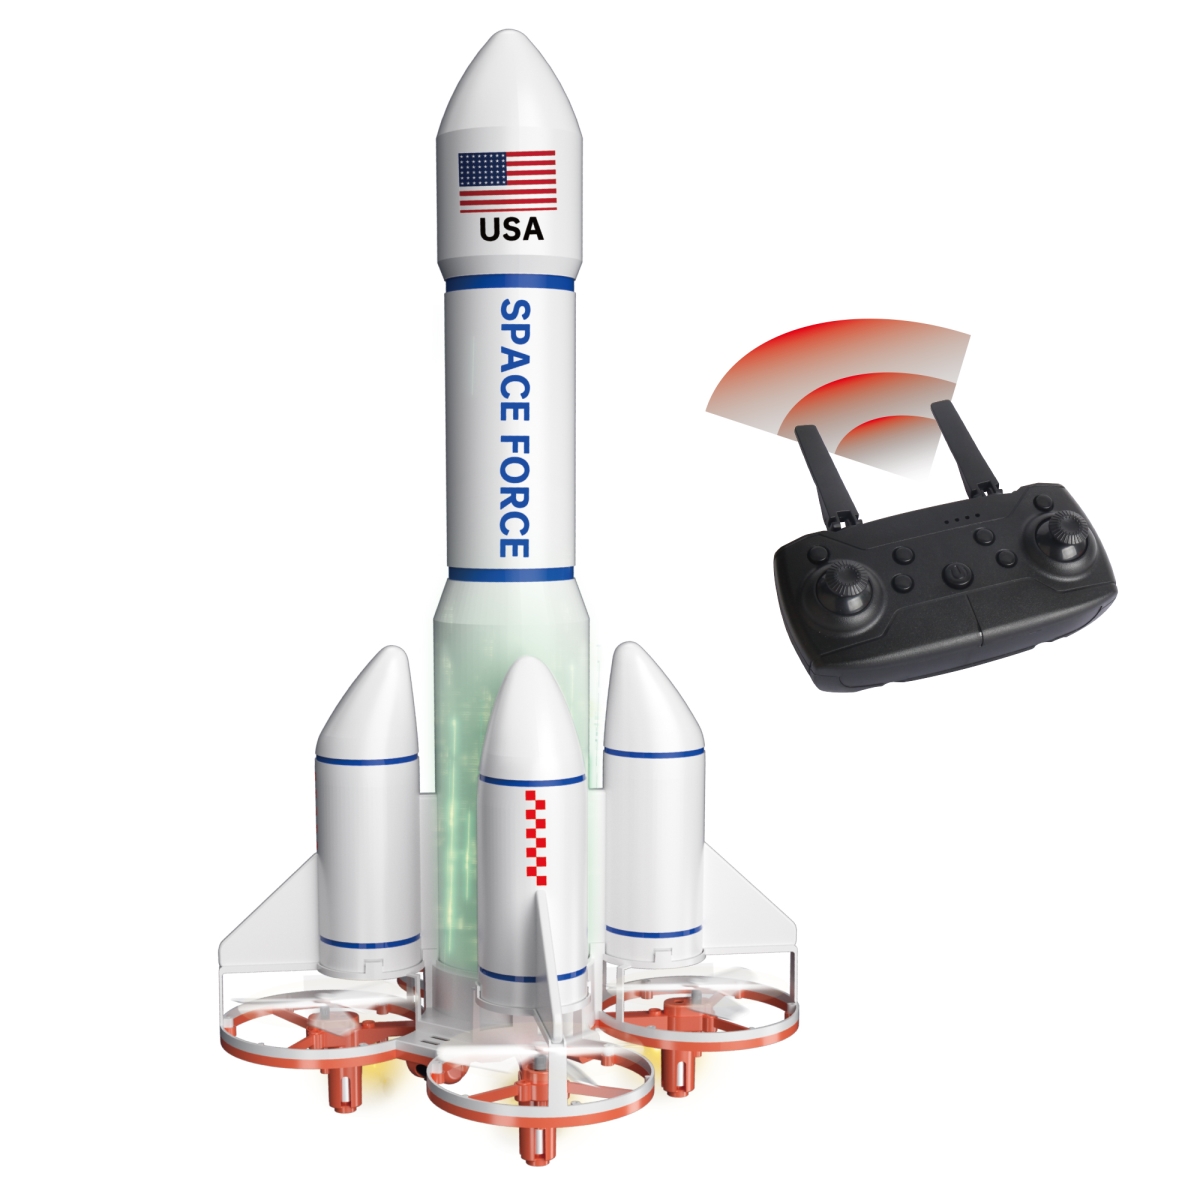 Picture of Odash JUPCR-17025 Space Force Rocket Drone Remote Control Toys